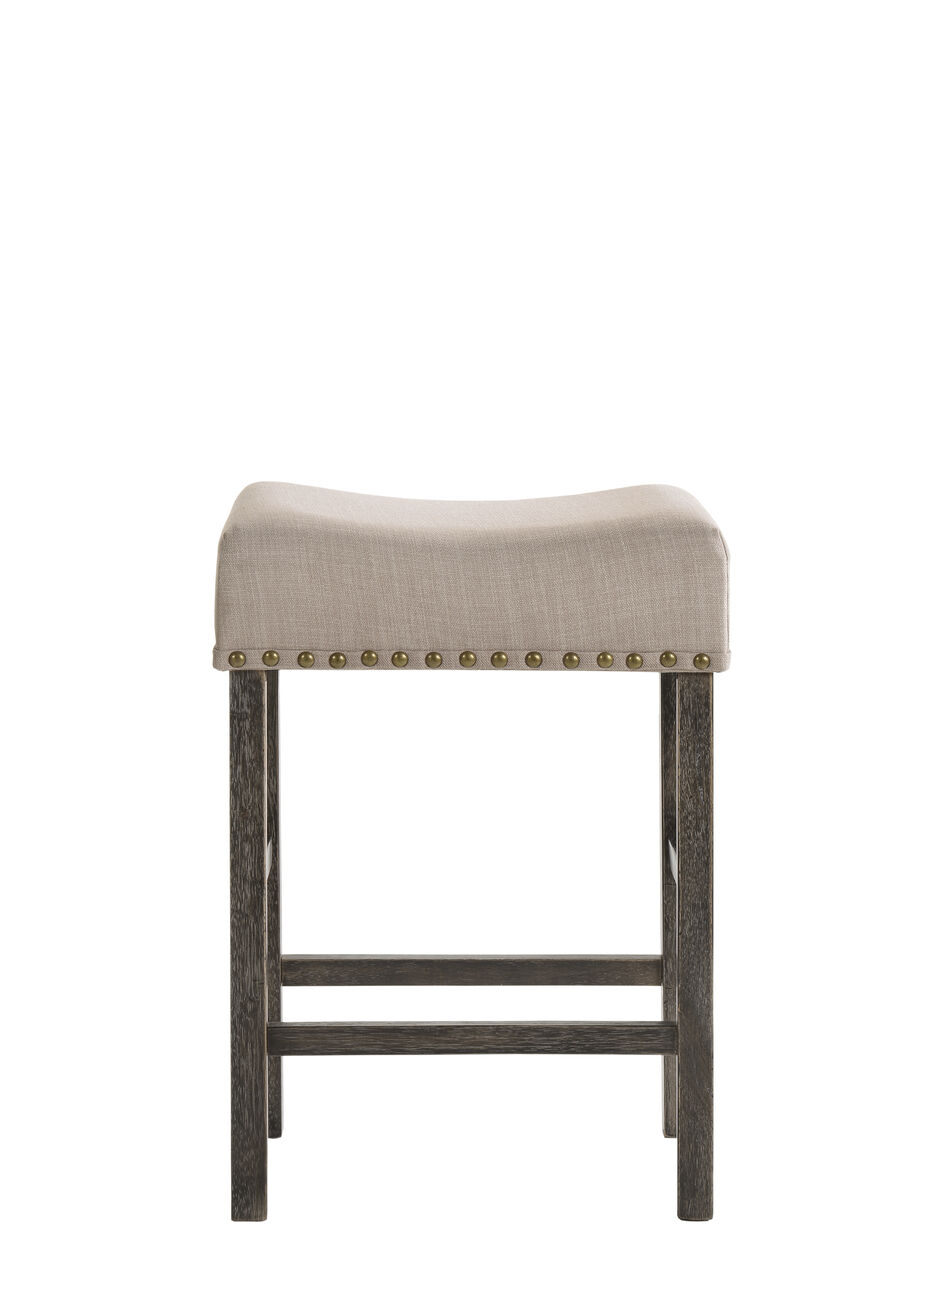 Wooden Counter Height Stool with Linen Upholstered Saddle Seat, Set of 2, Beige and Gray